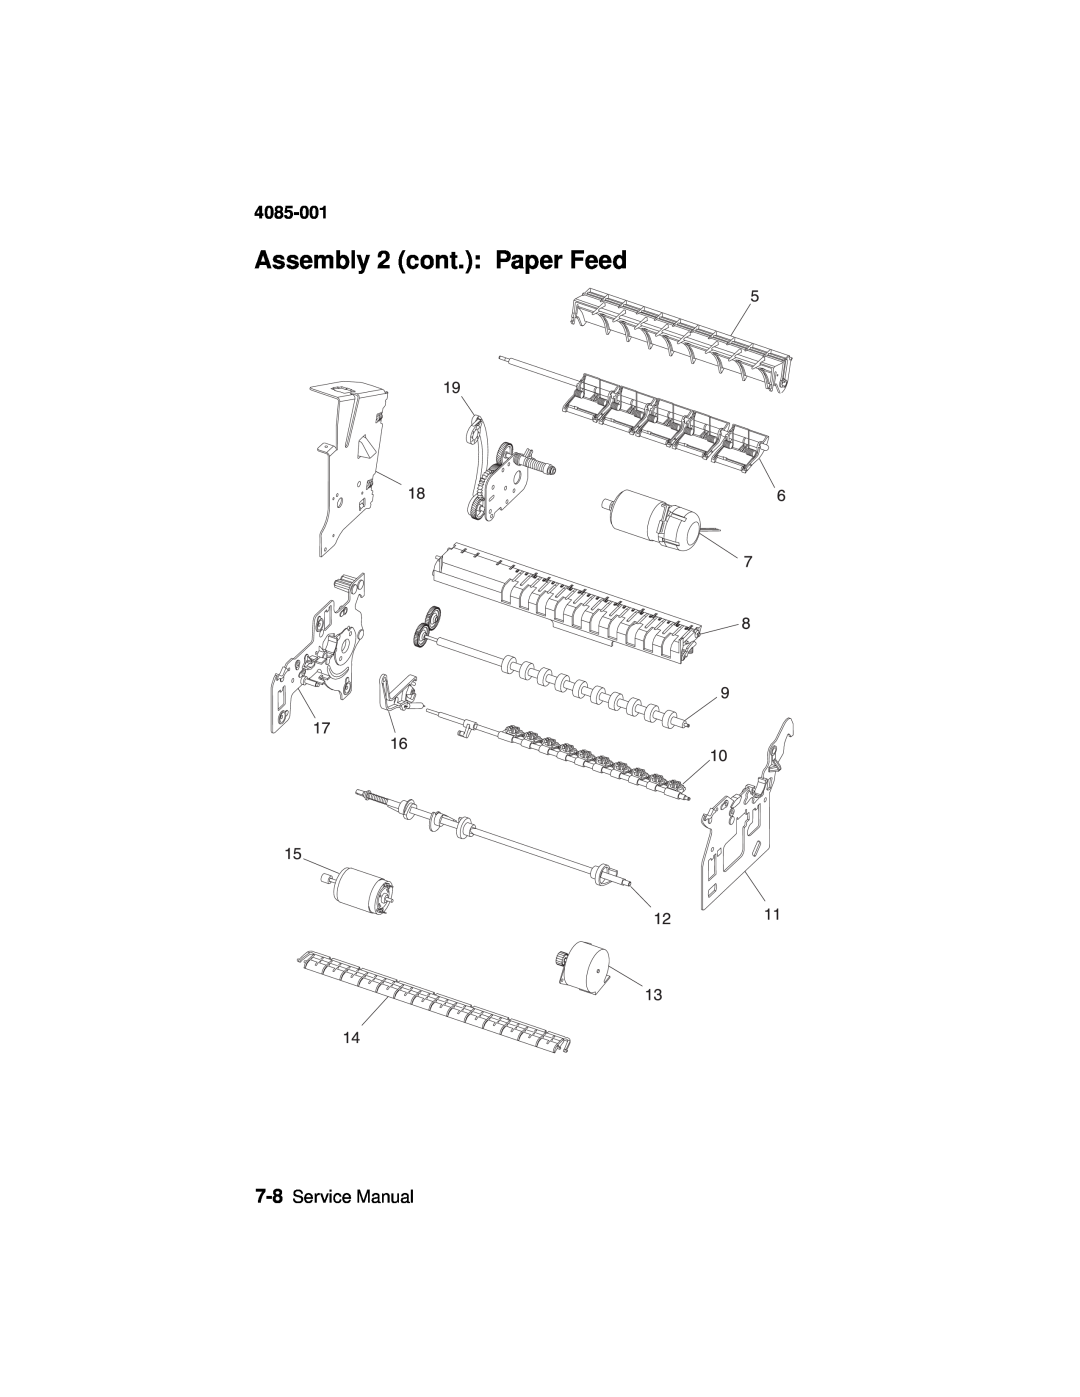 Lexmark J110, Printer manual Assembly 2 cont.: Paper Feed, 4085-001, Service Manual 